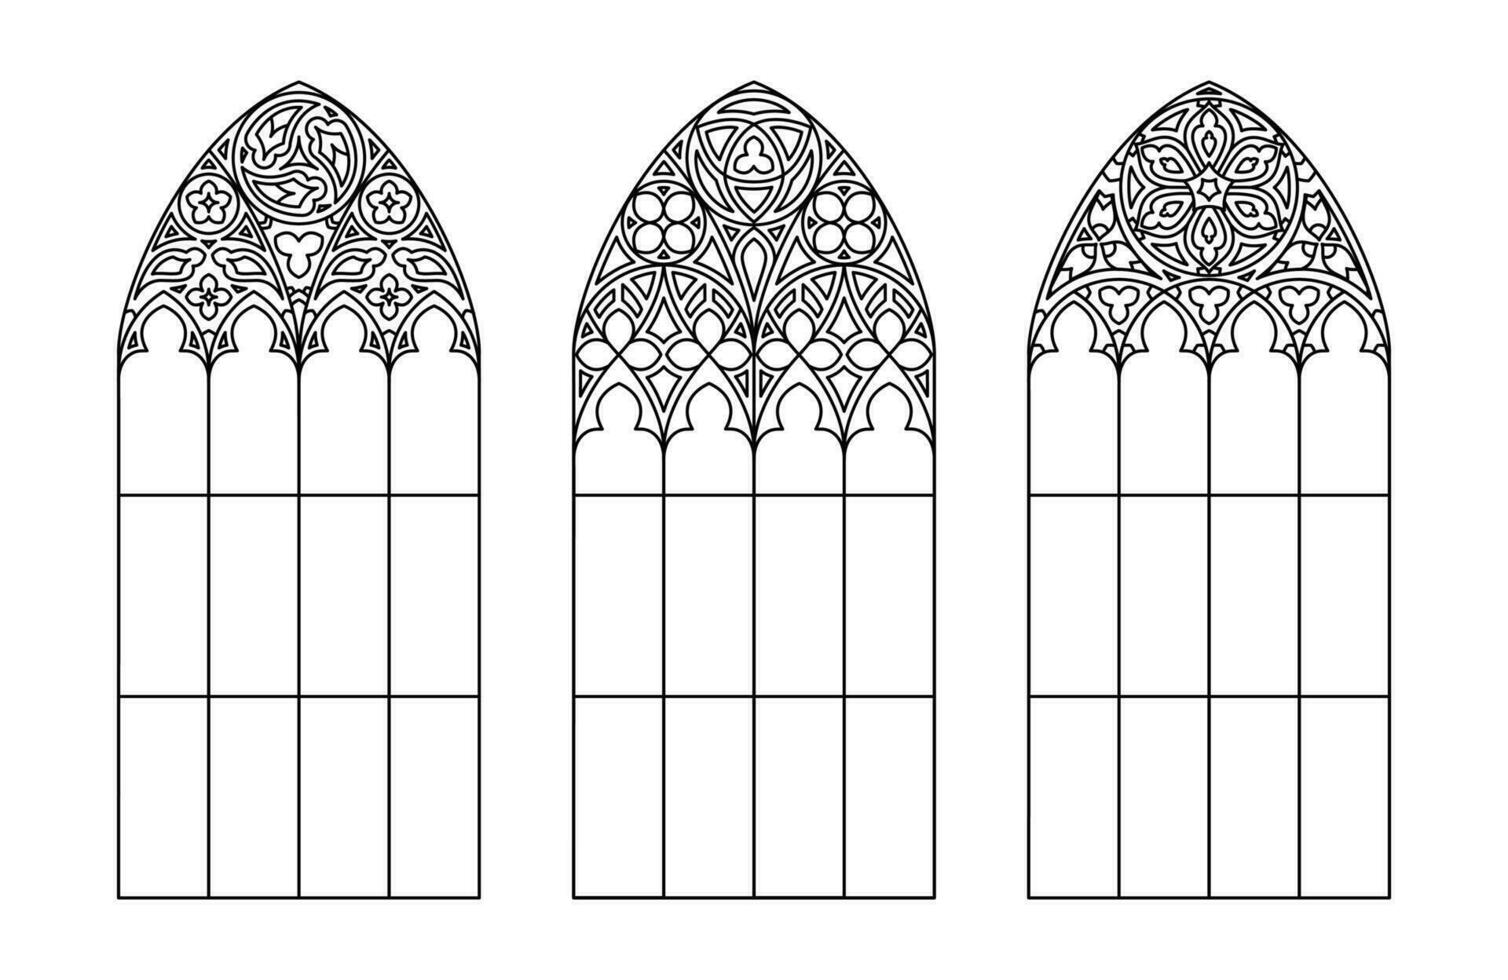 Glass church windows. Catholic black and white arches. vector